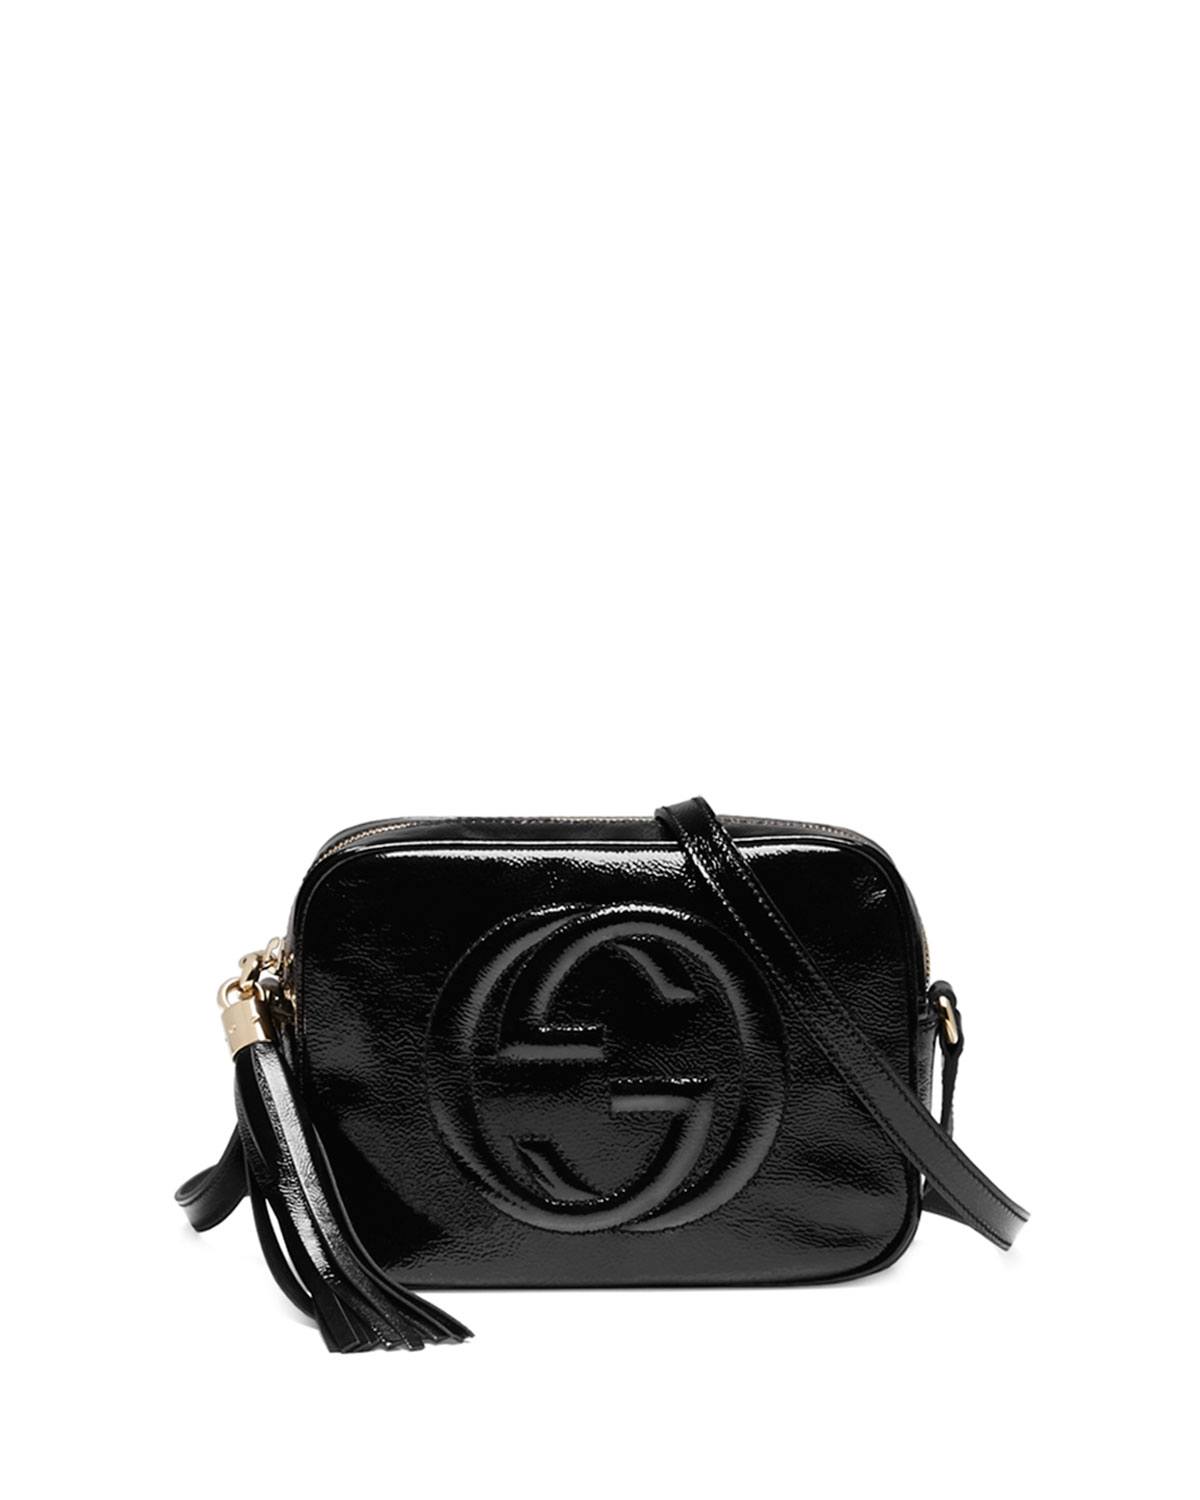 Gucci Soho Soft Patent Leather Disco Bag in Black | Lyst